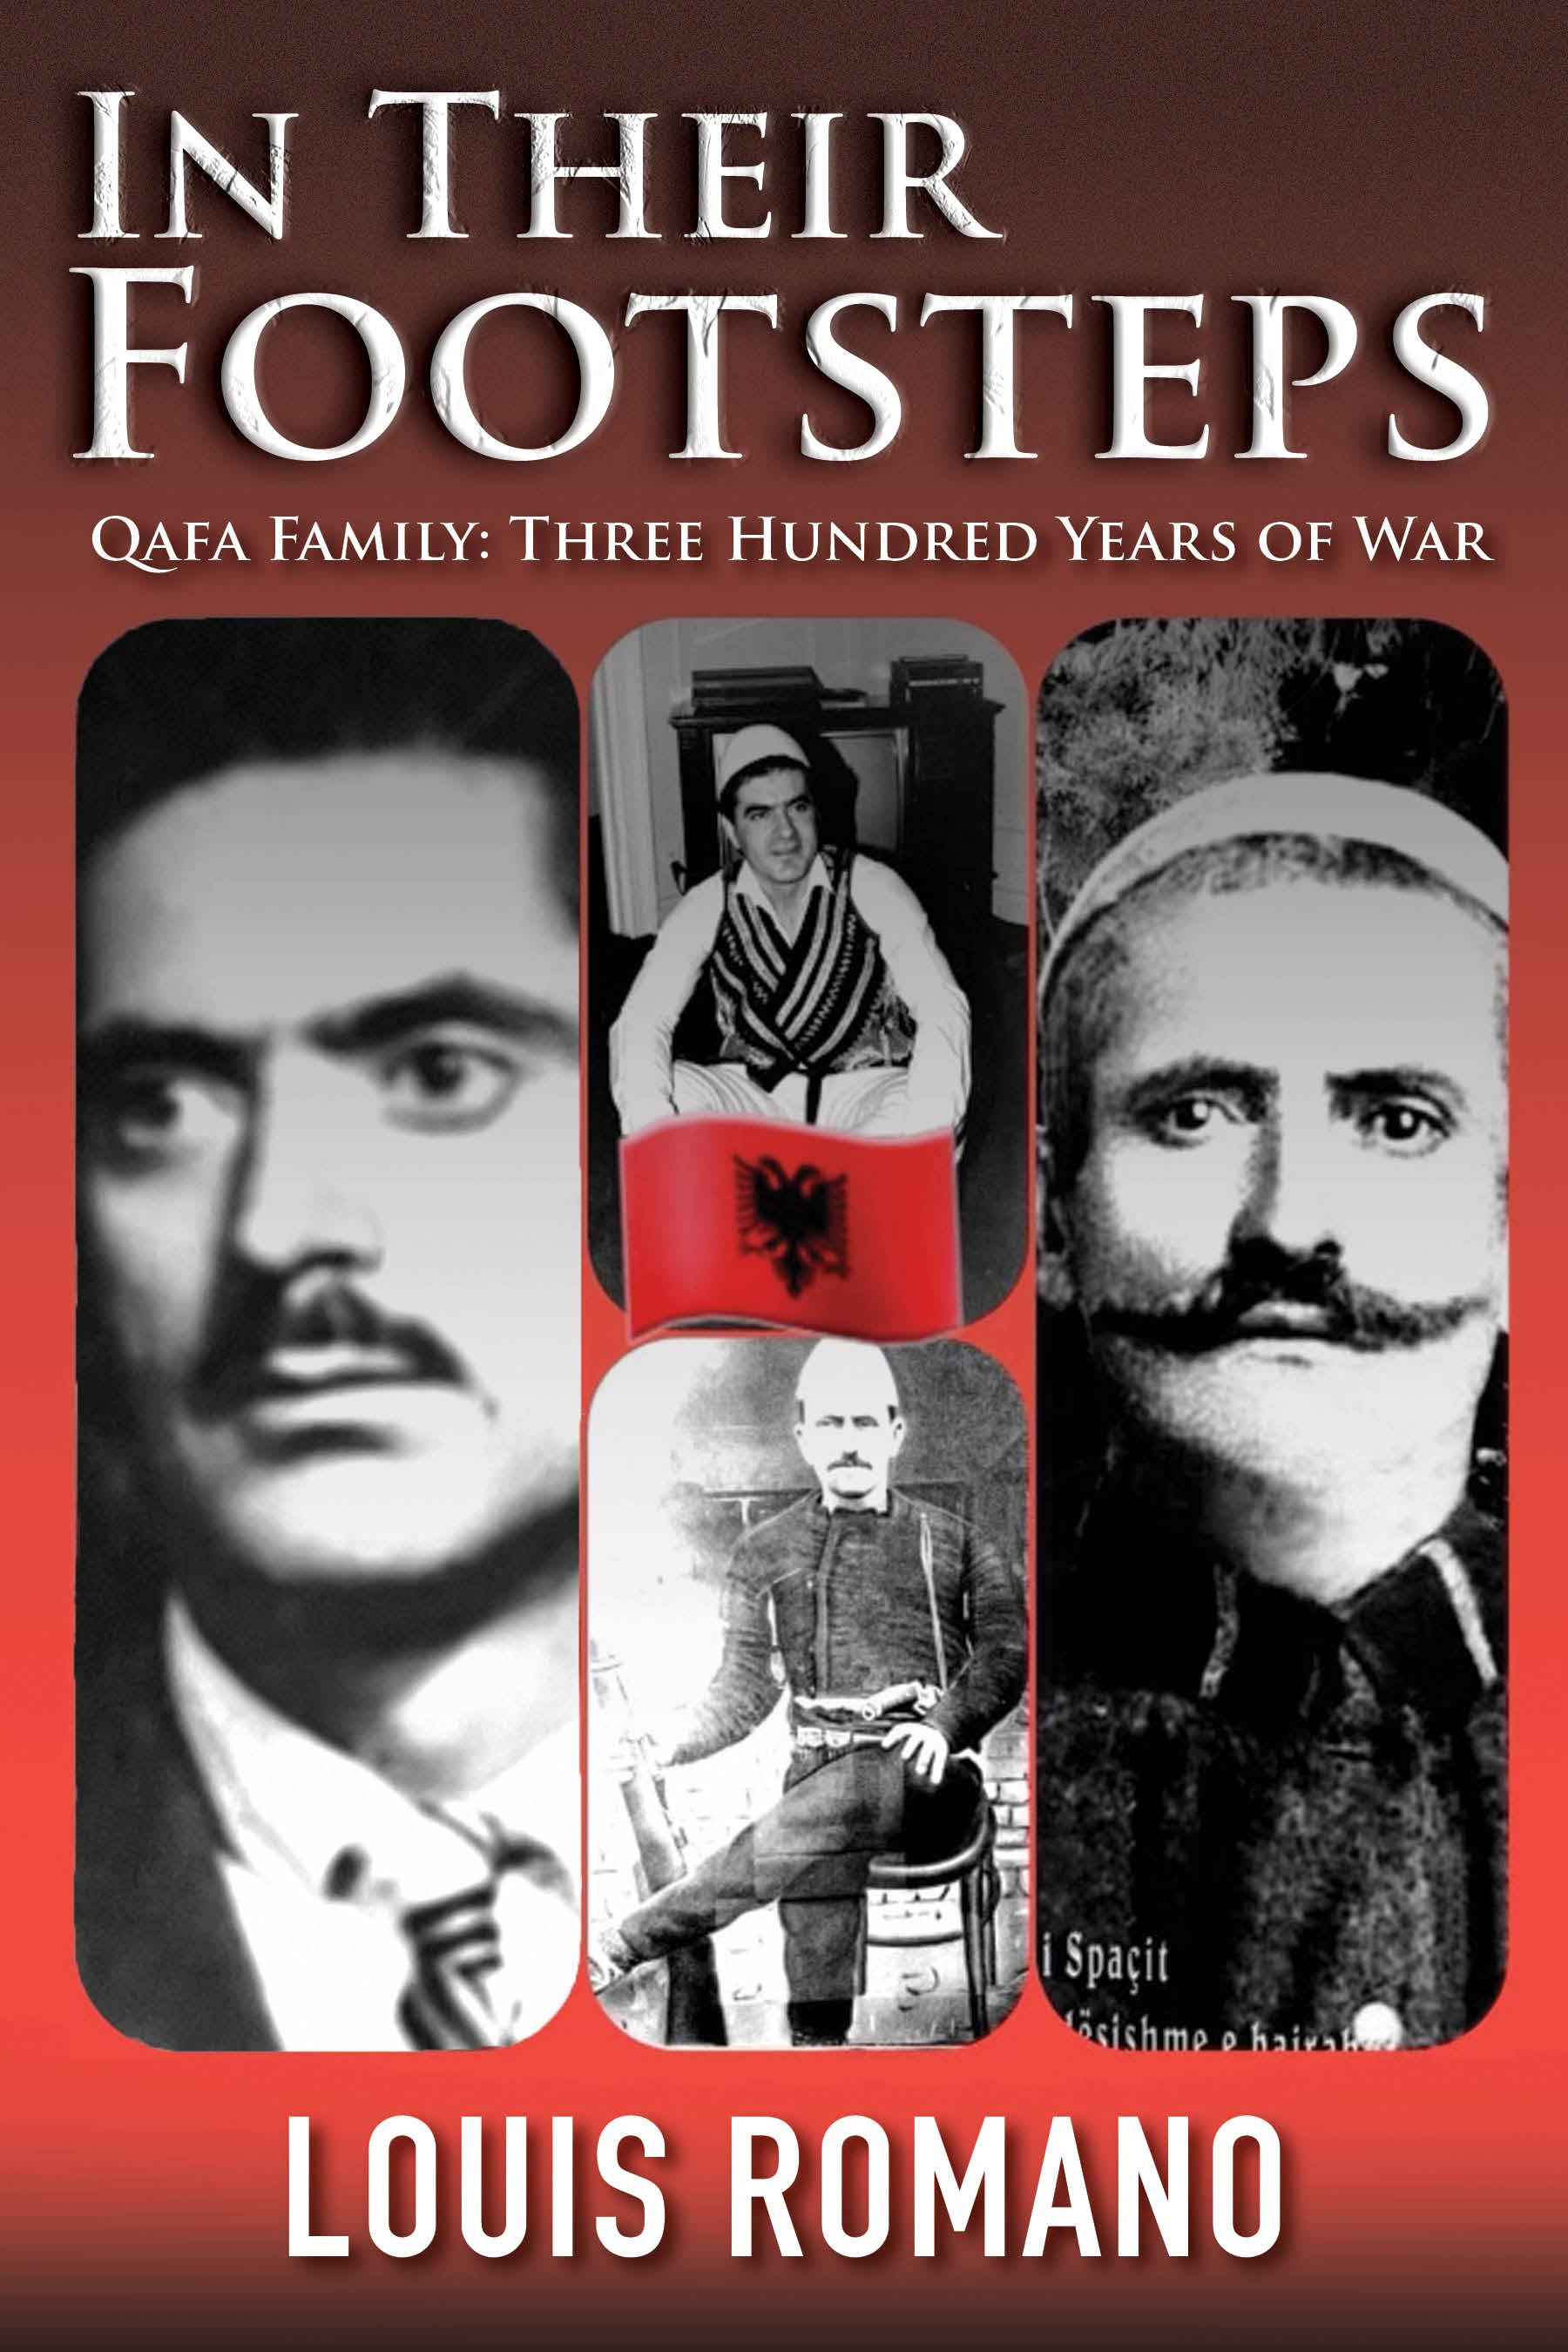 In Their Footsteps  Qafa Family: Three Hundred Years of War. Hardcover Book